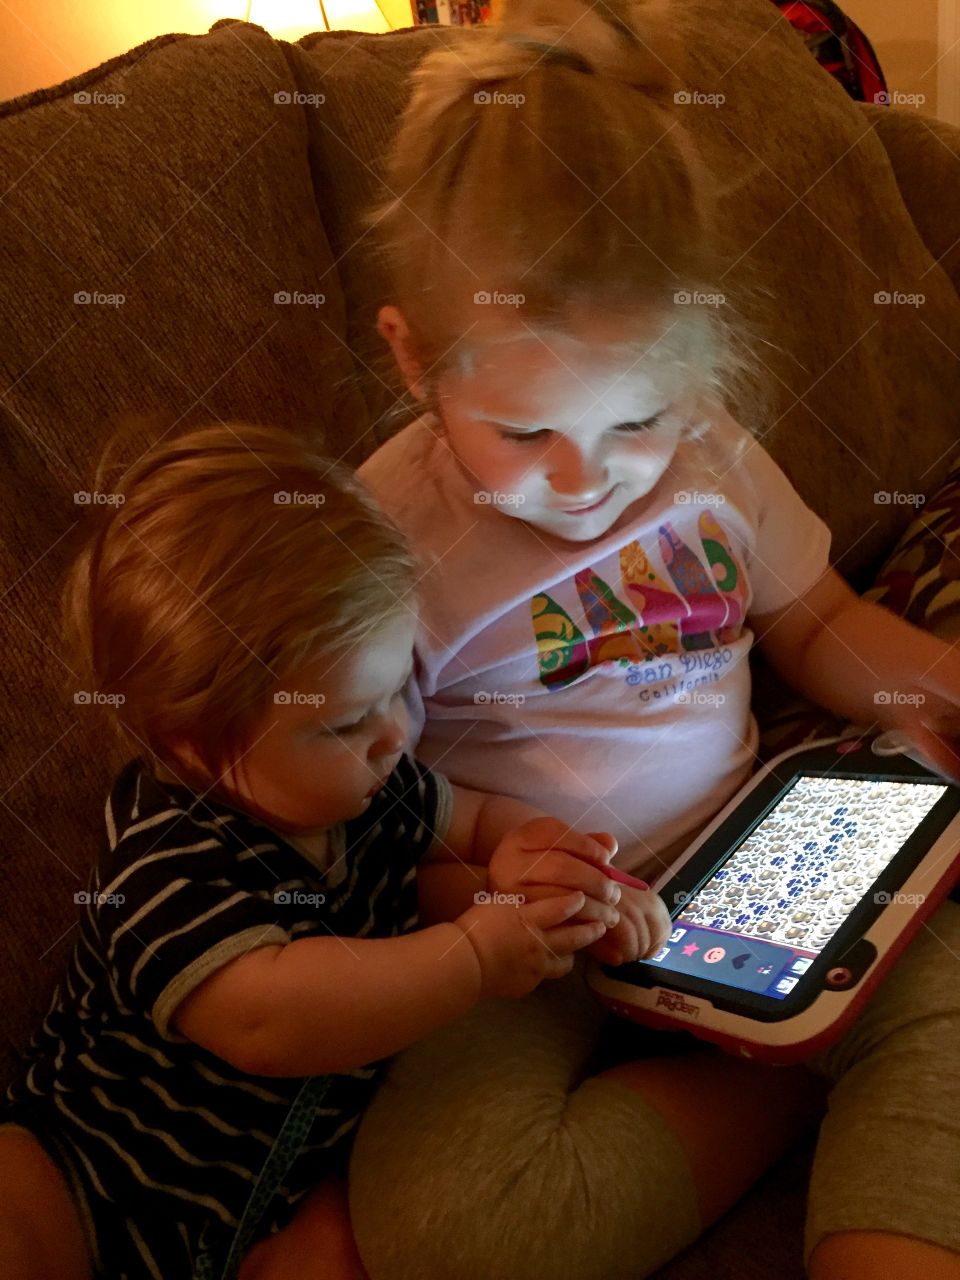 Children and technology